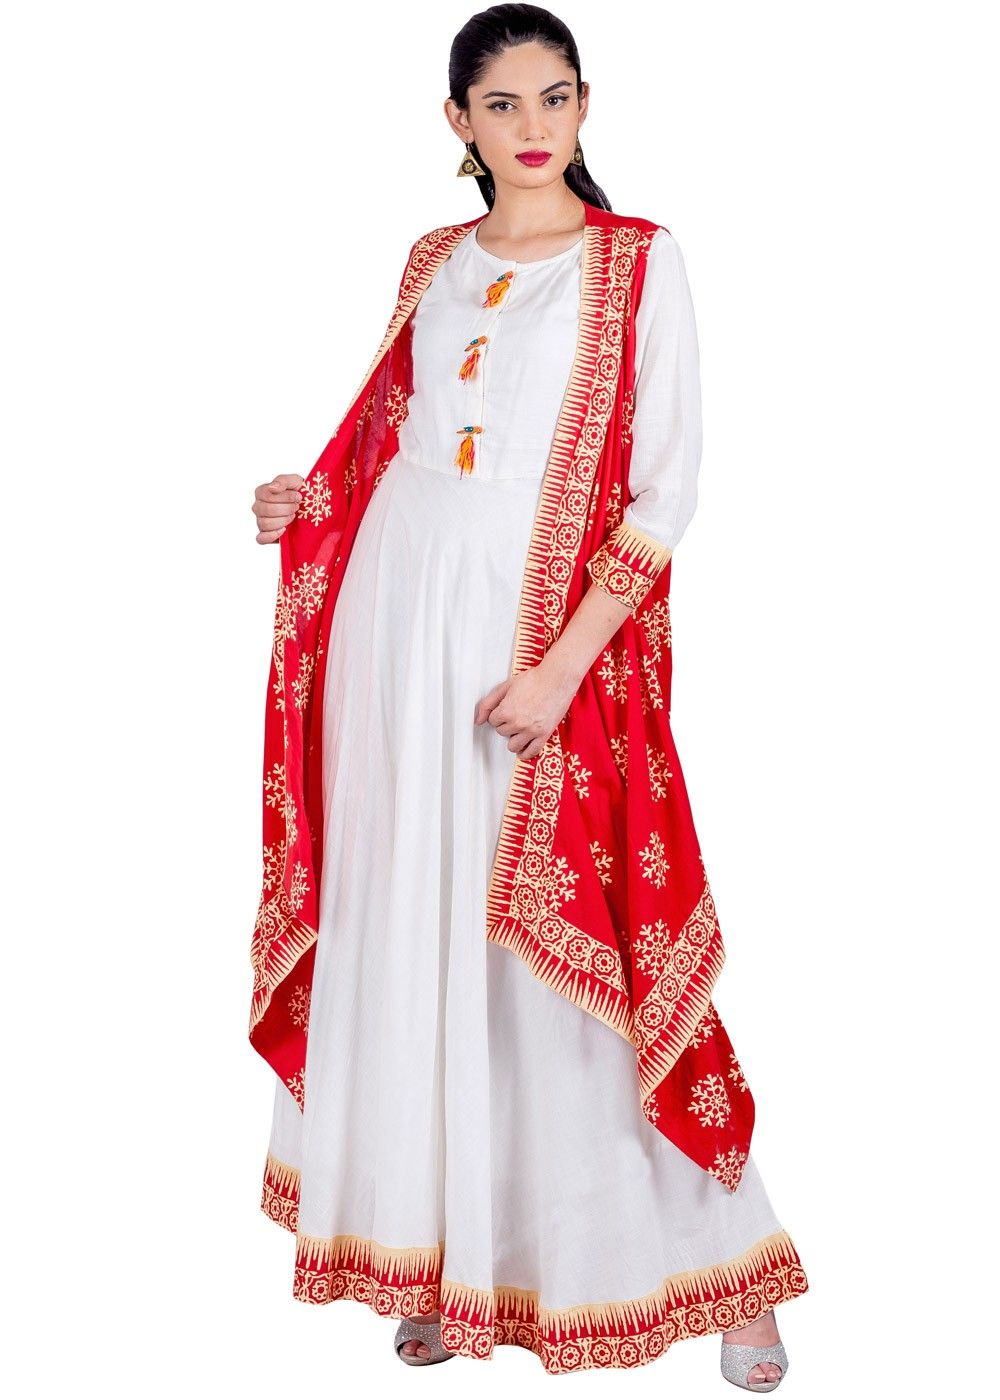 Buy anubhutee Women's Cotton Off White Thread Work Embroidered A-Line Indo  Western Dress at Amazon.in